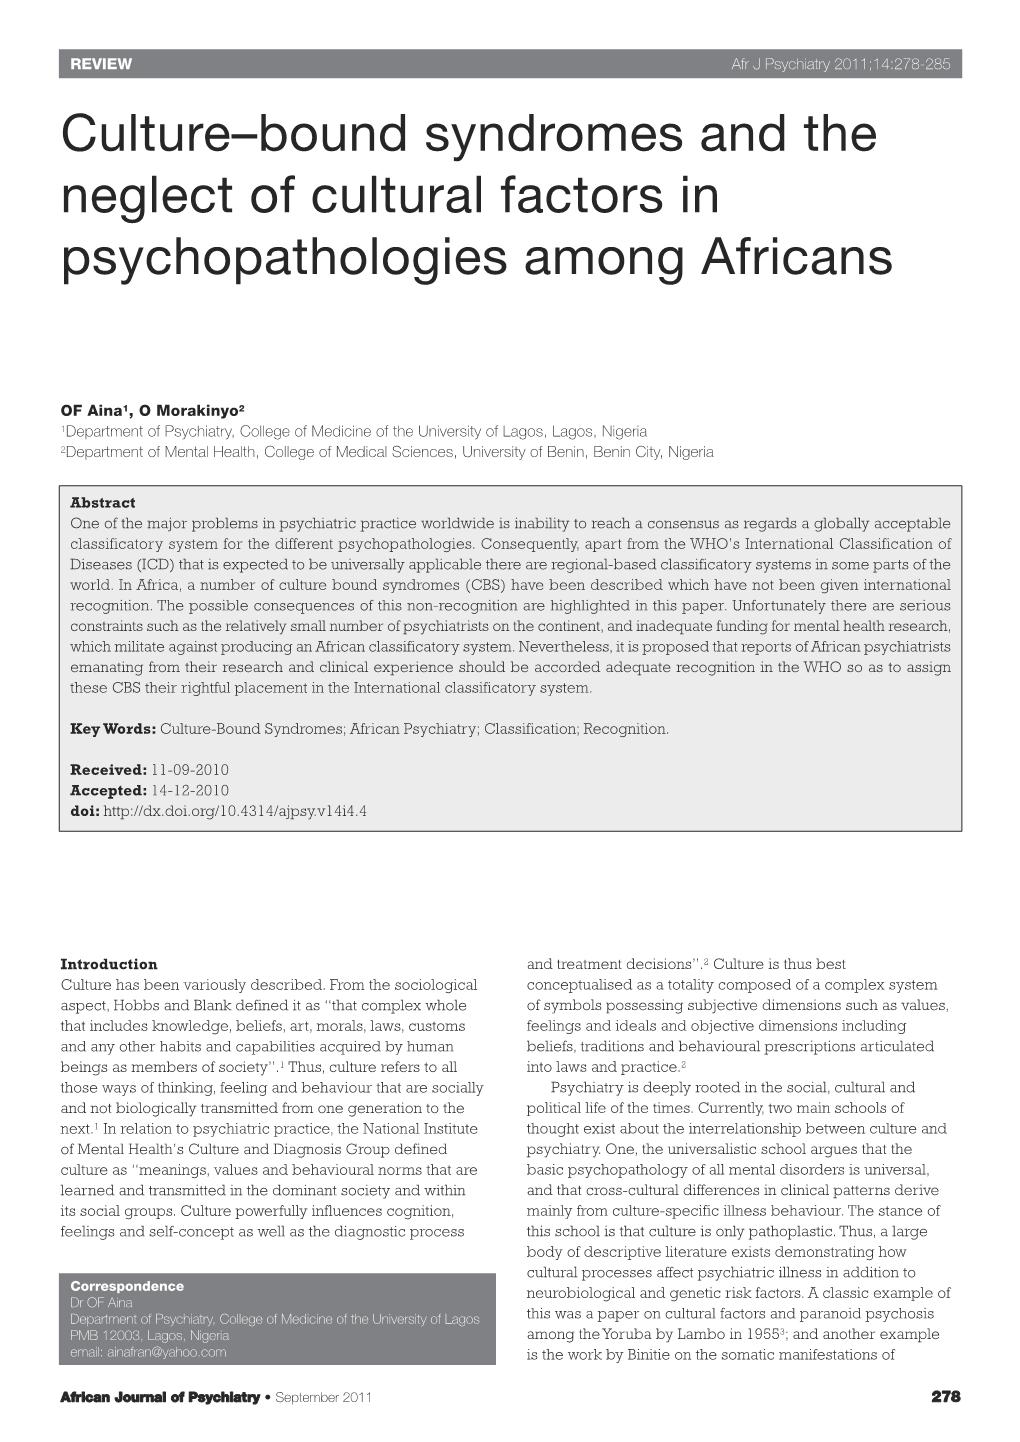 Culture–Bound Syndromes and the Neglect of Cultural Factors in Psychopathologies Among Africans